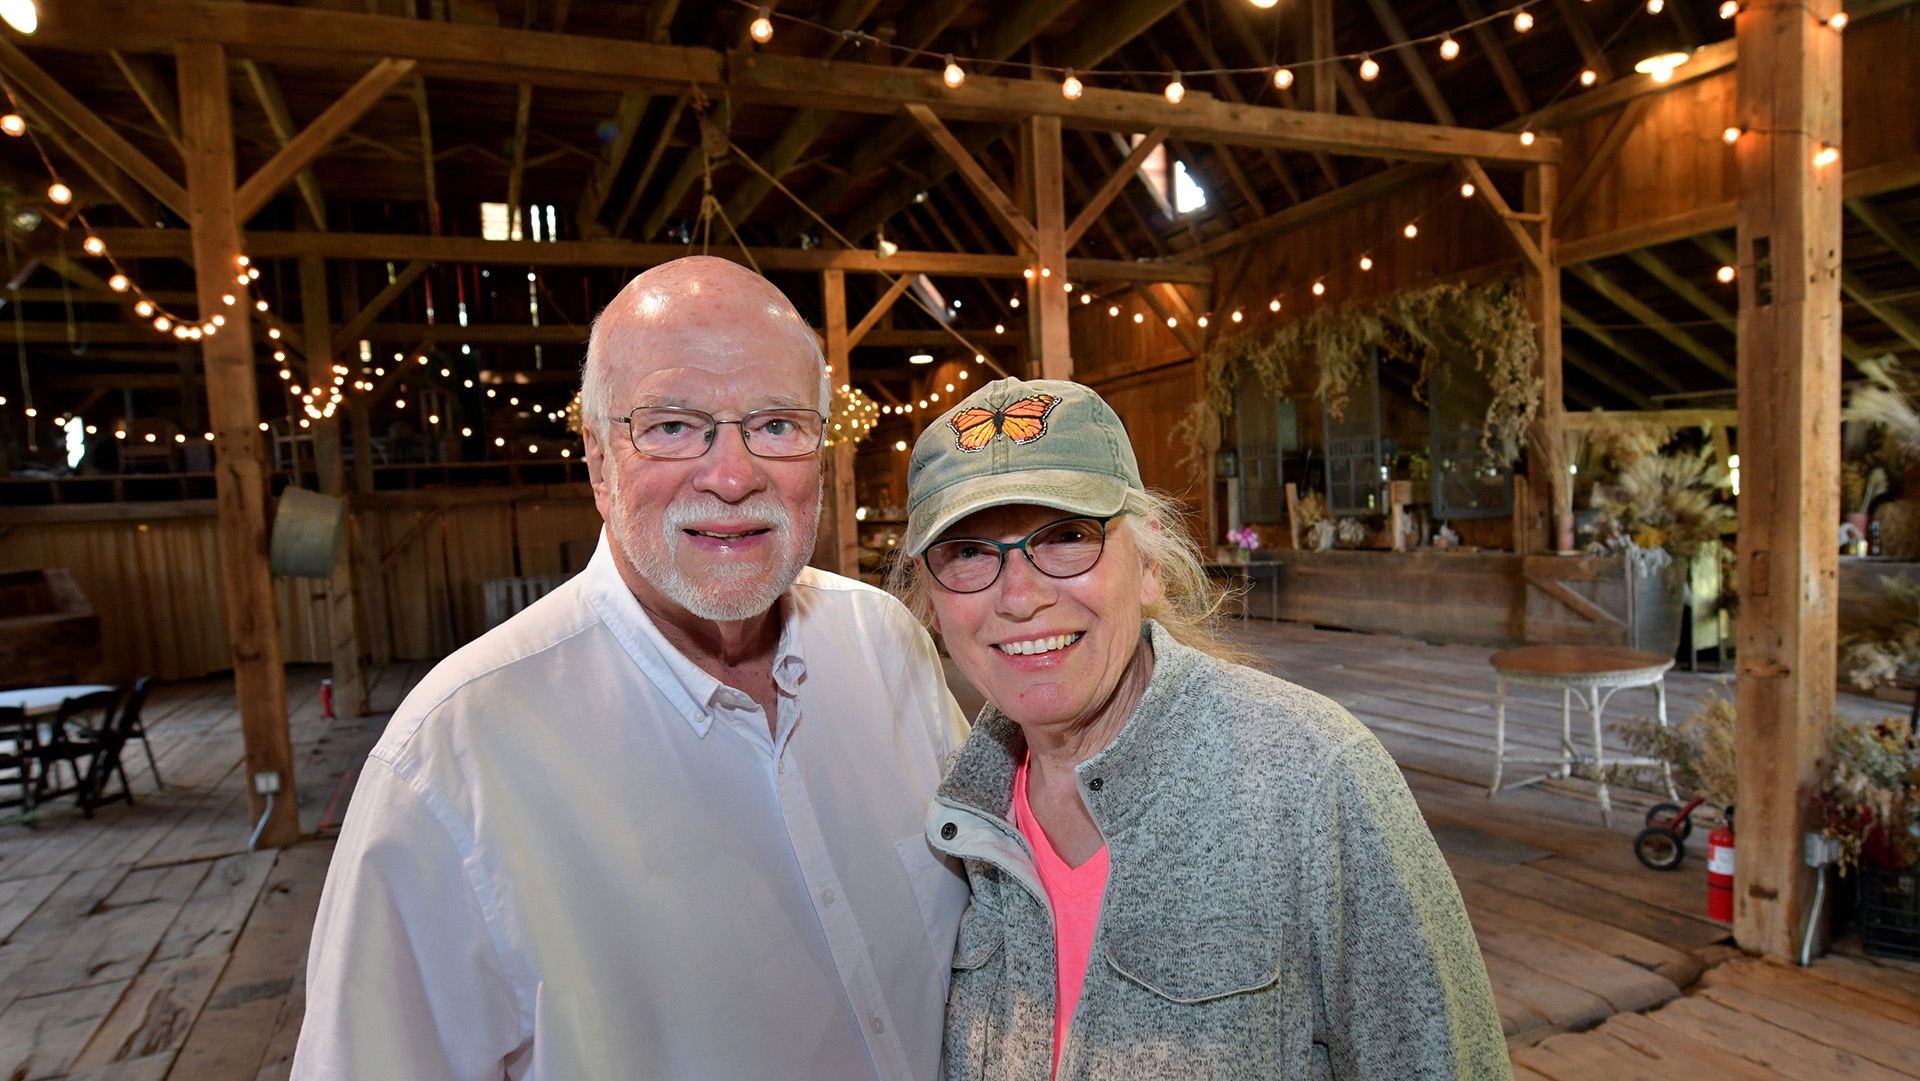 Rich Wood and Janis King at their Walnut Grove Farm in Knoxville